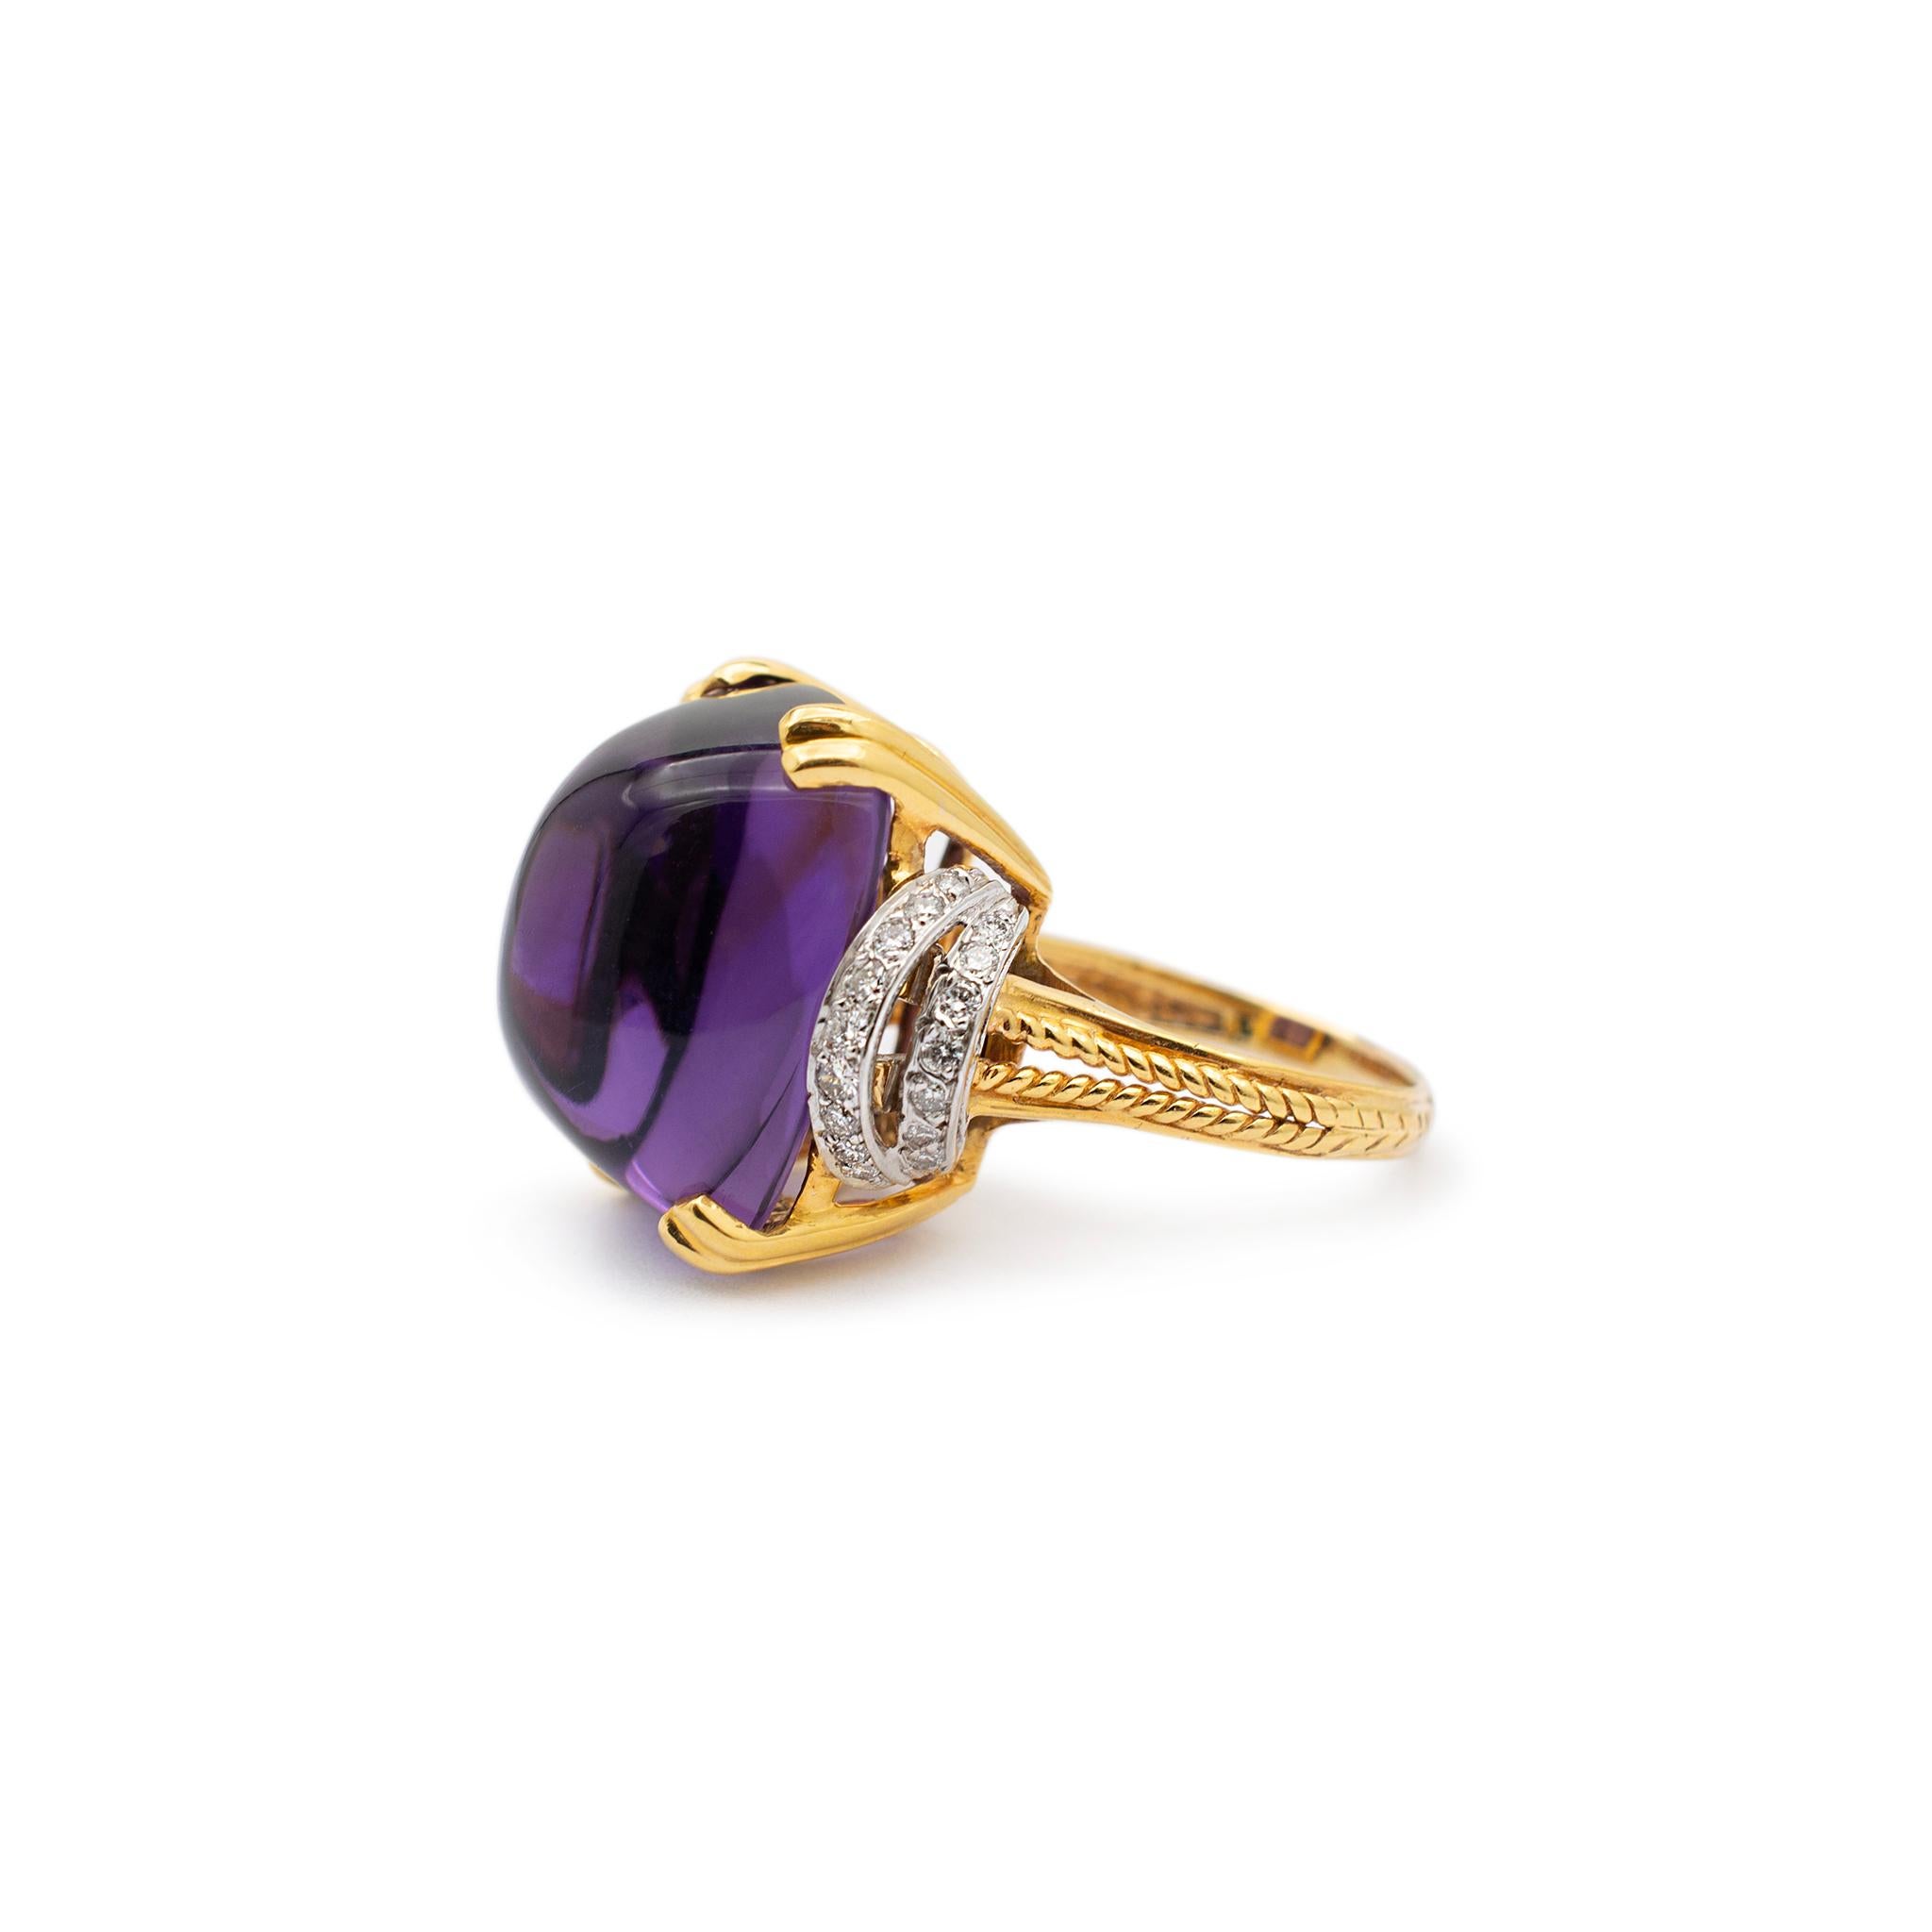 Ladies 14K Yellow & White Gold Amethyst Diamond Cocktail Ring In Excellent Condition For Sale In Houston, TX